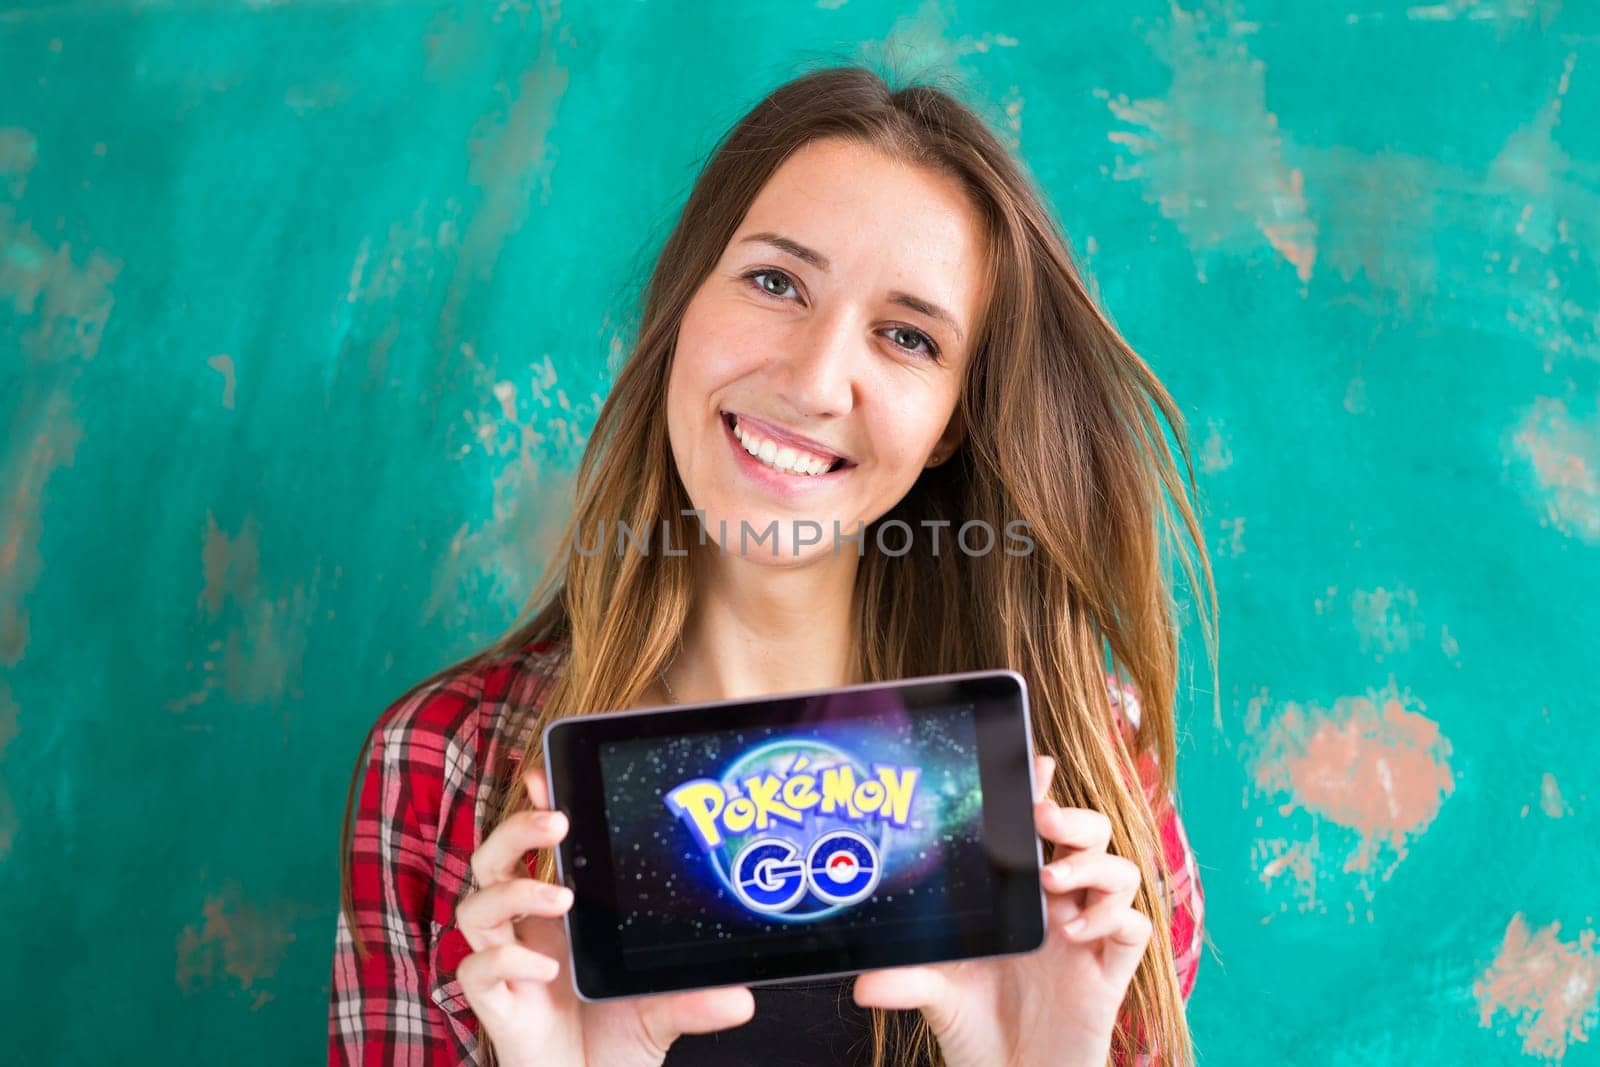 Ufa, Russia. - July 29: Woman show the tablet with Pokemon Go logo, July 29, 2016 in Ufa, Russia by Satura86